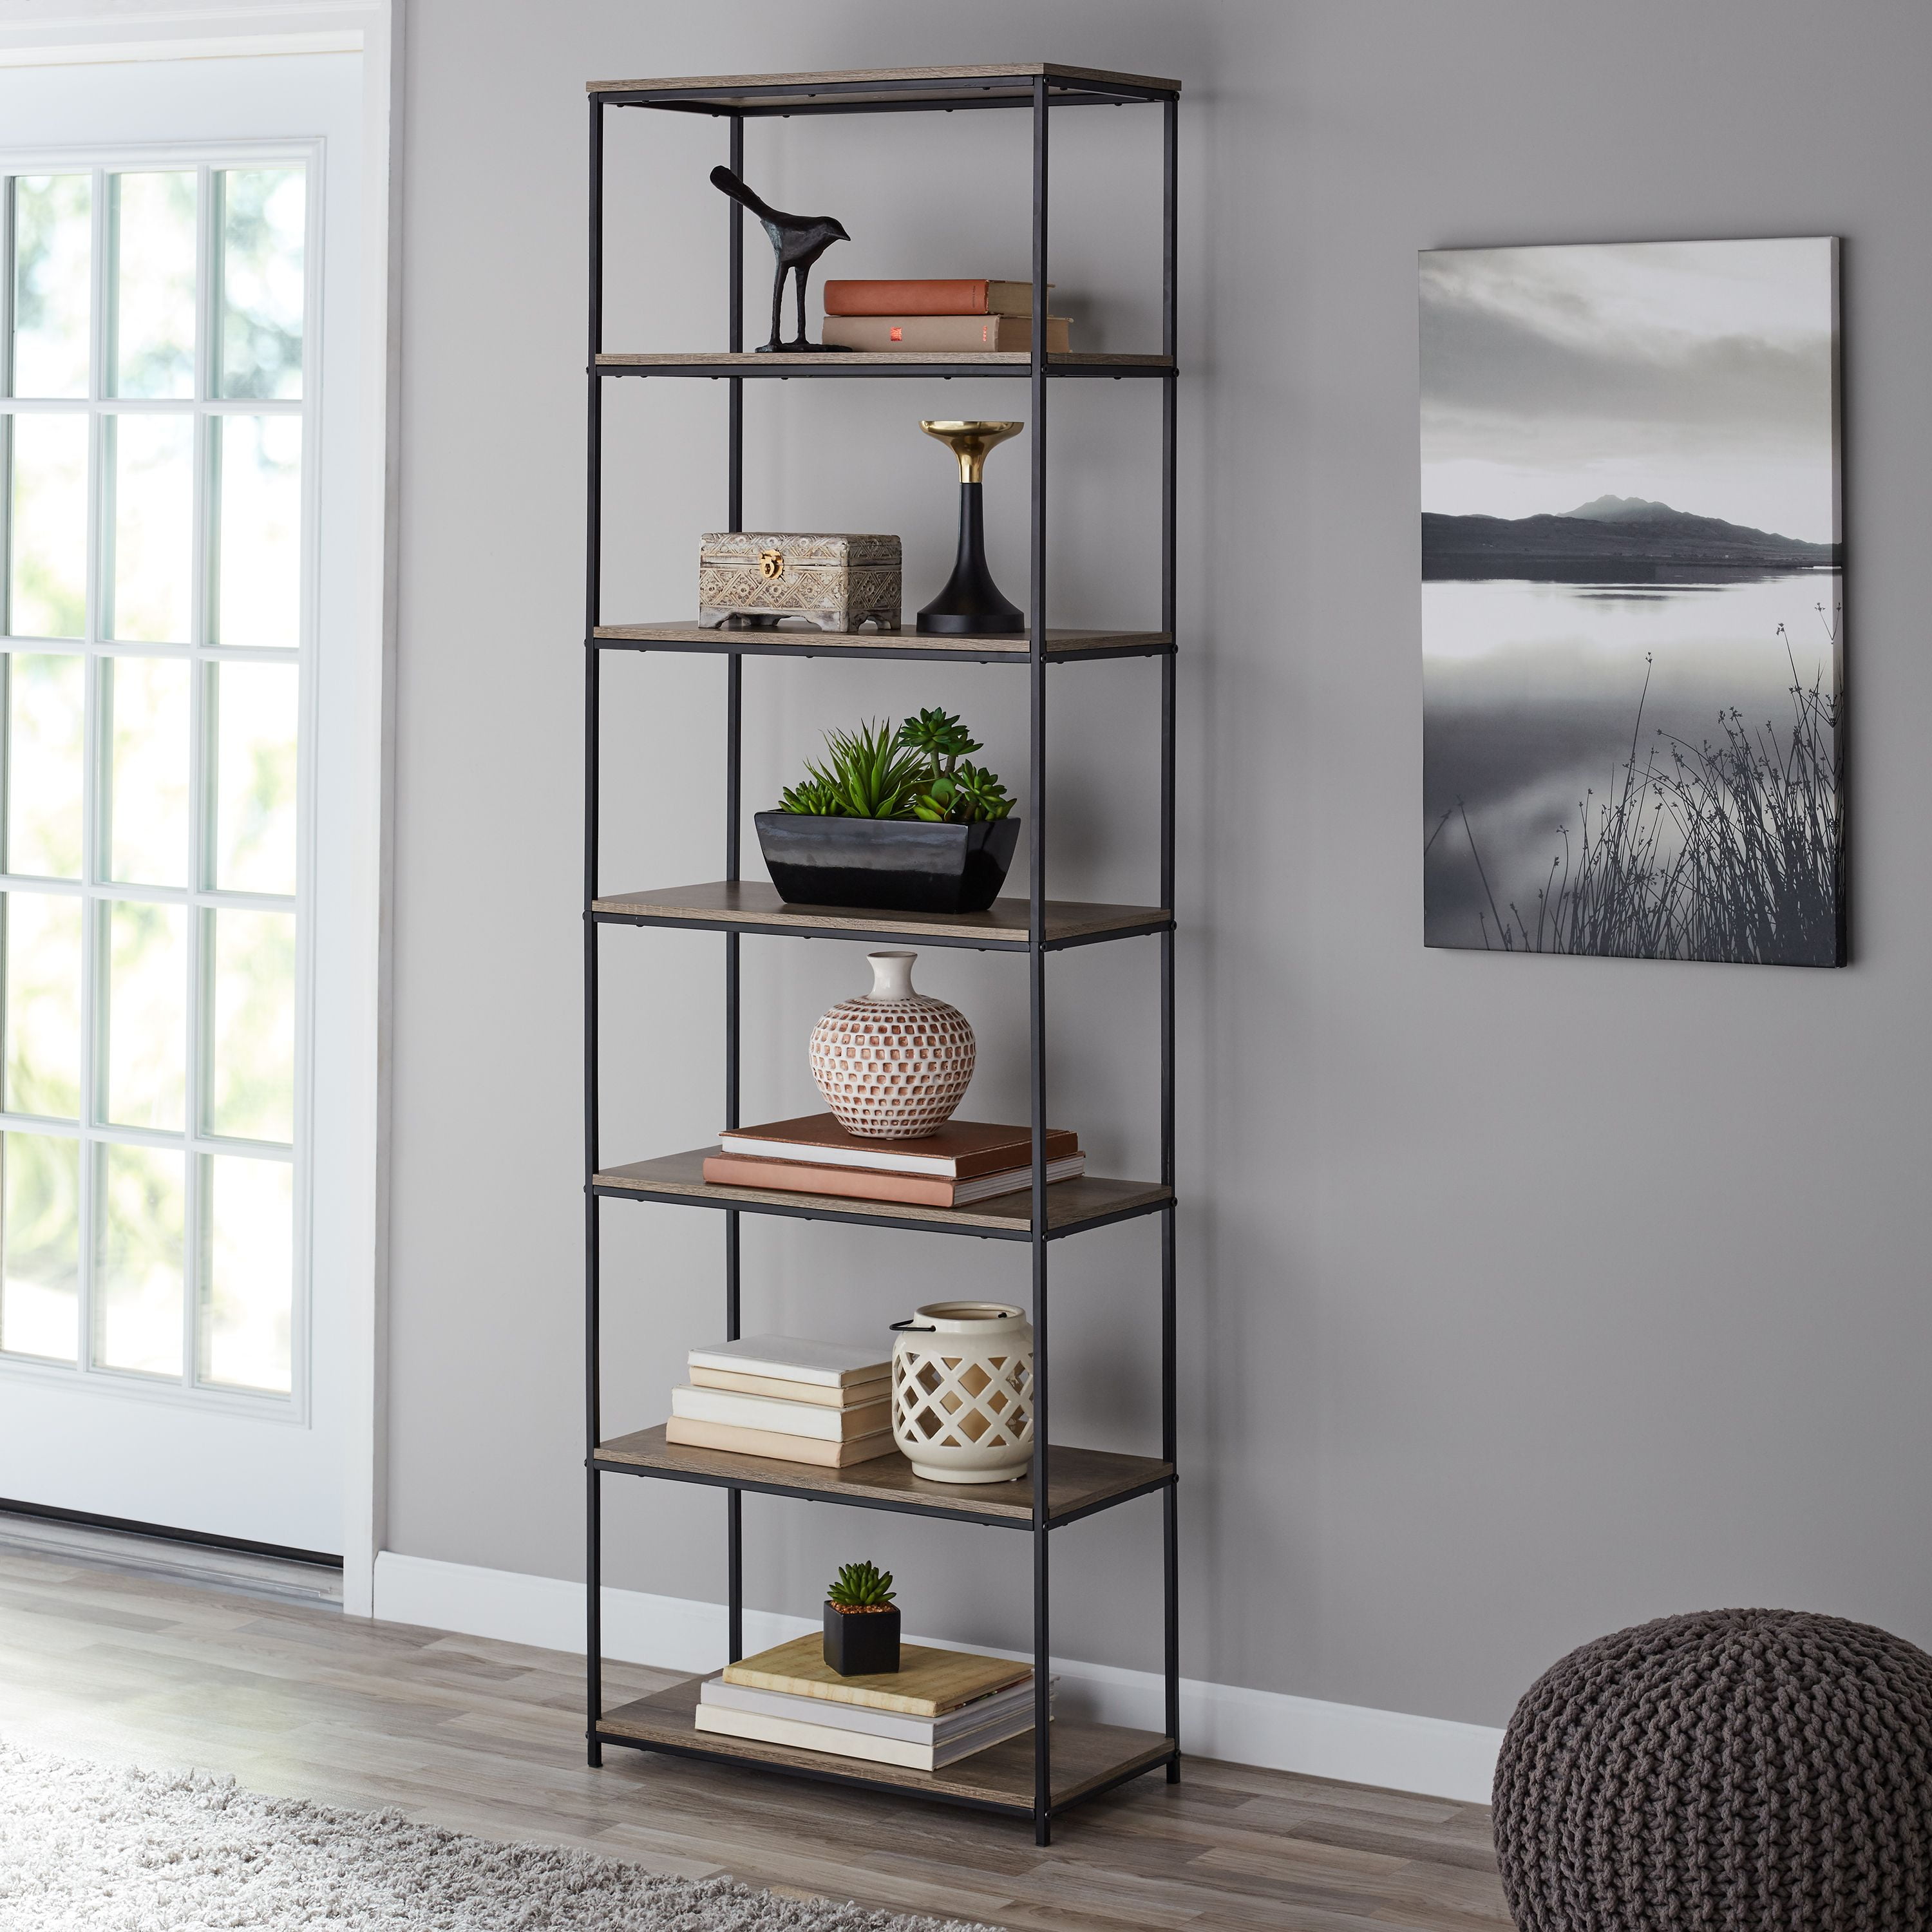 Buy Wall bookshelf rust color - 17.71 inches - Set of 6